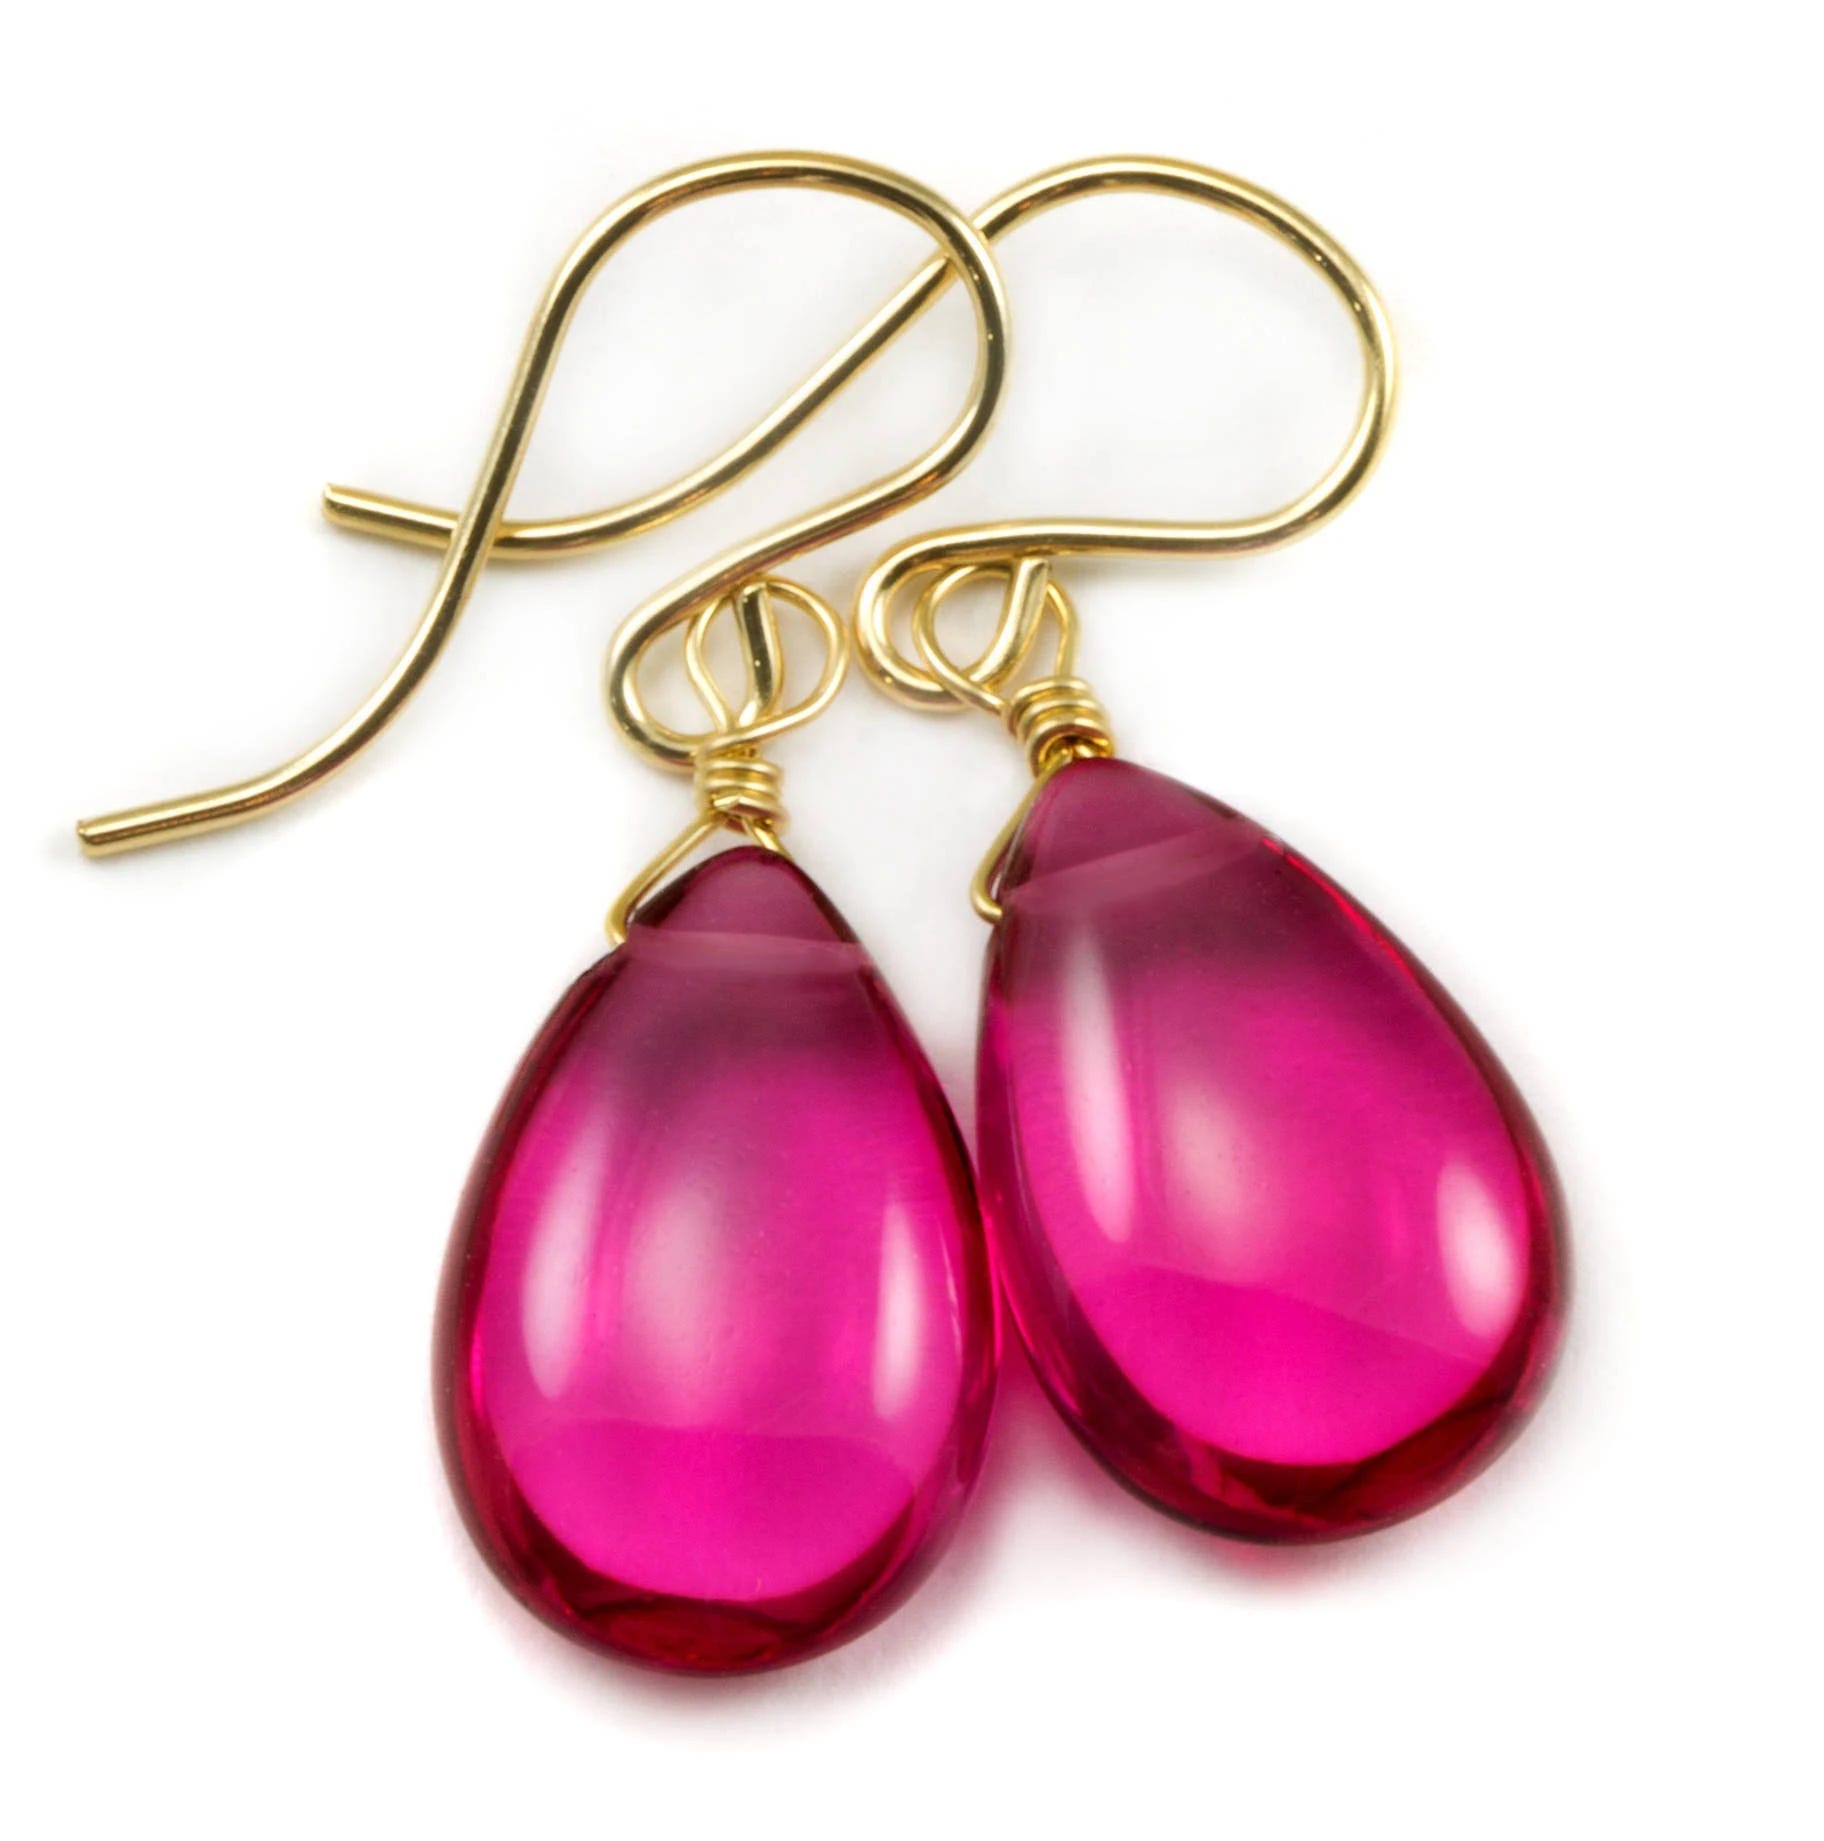 Hot Pink Teardrop Drops Earrings in Sterling Silver and Gold Options | Image